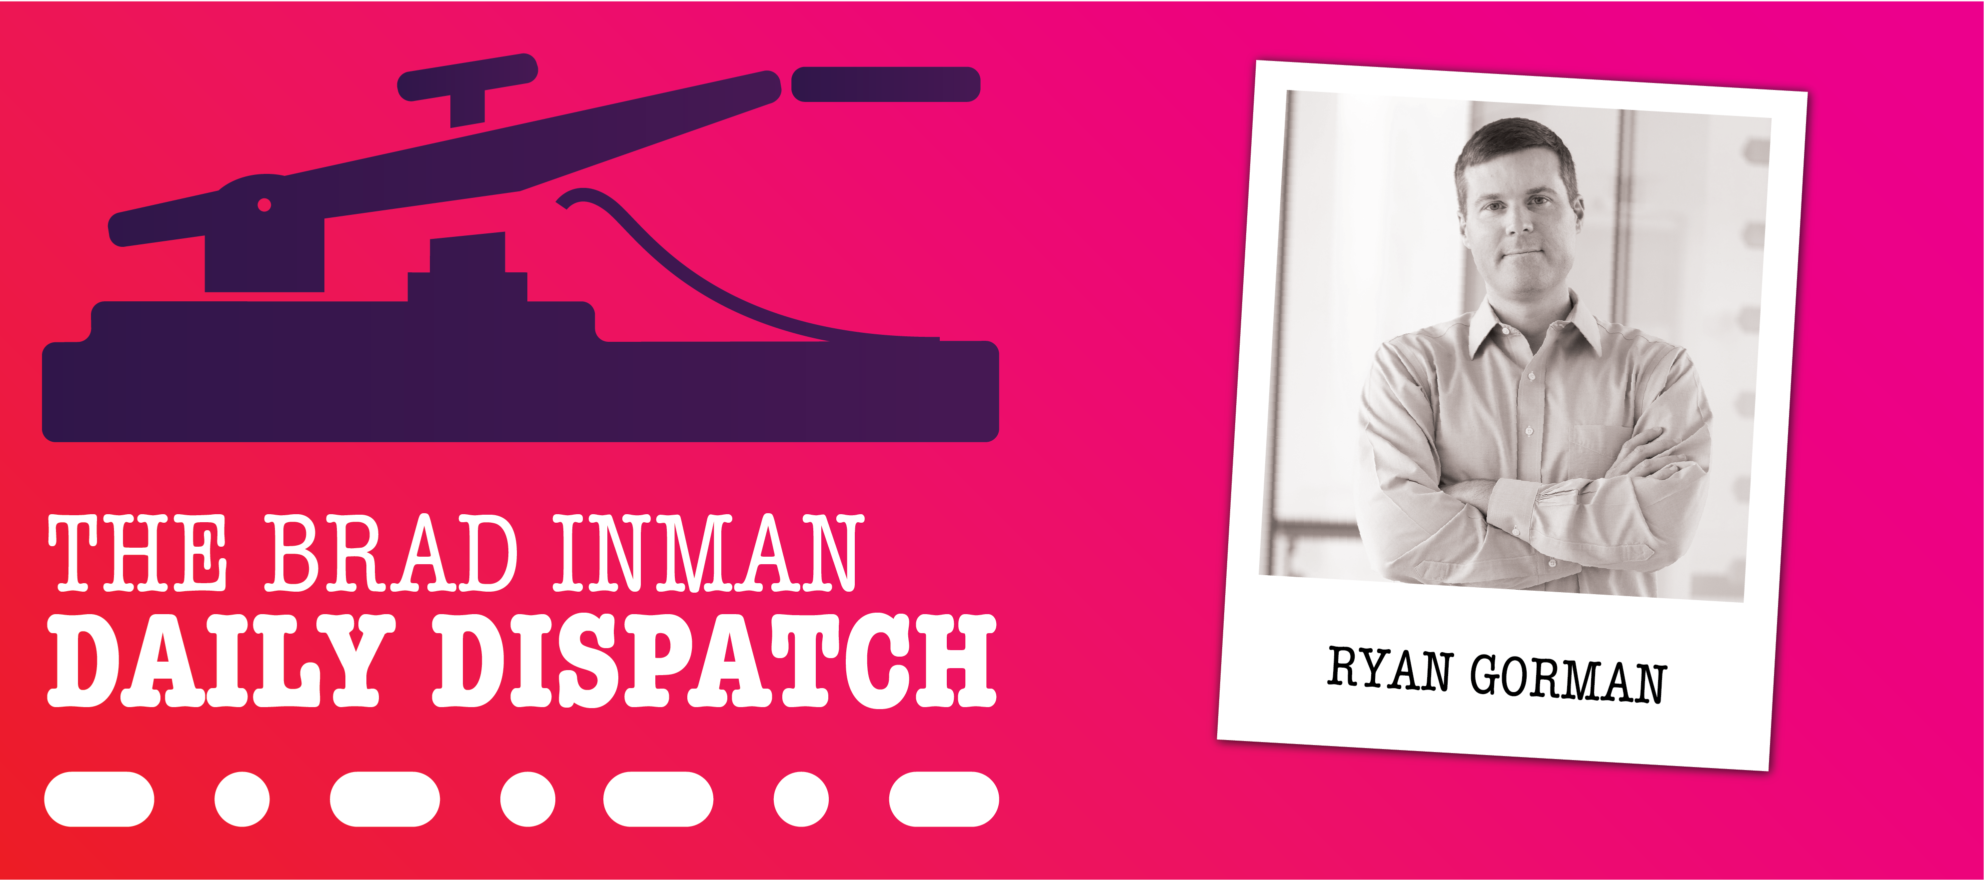 graphic logo for the daily dispatch podcast with a in inlay image of ryan gorman